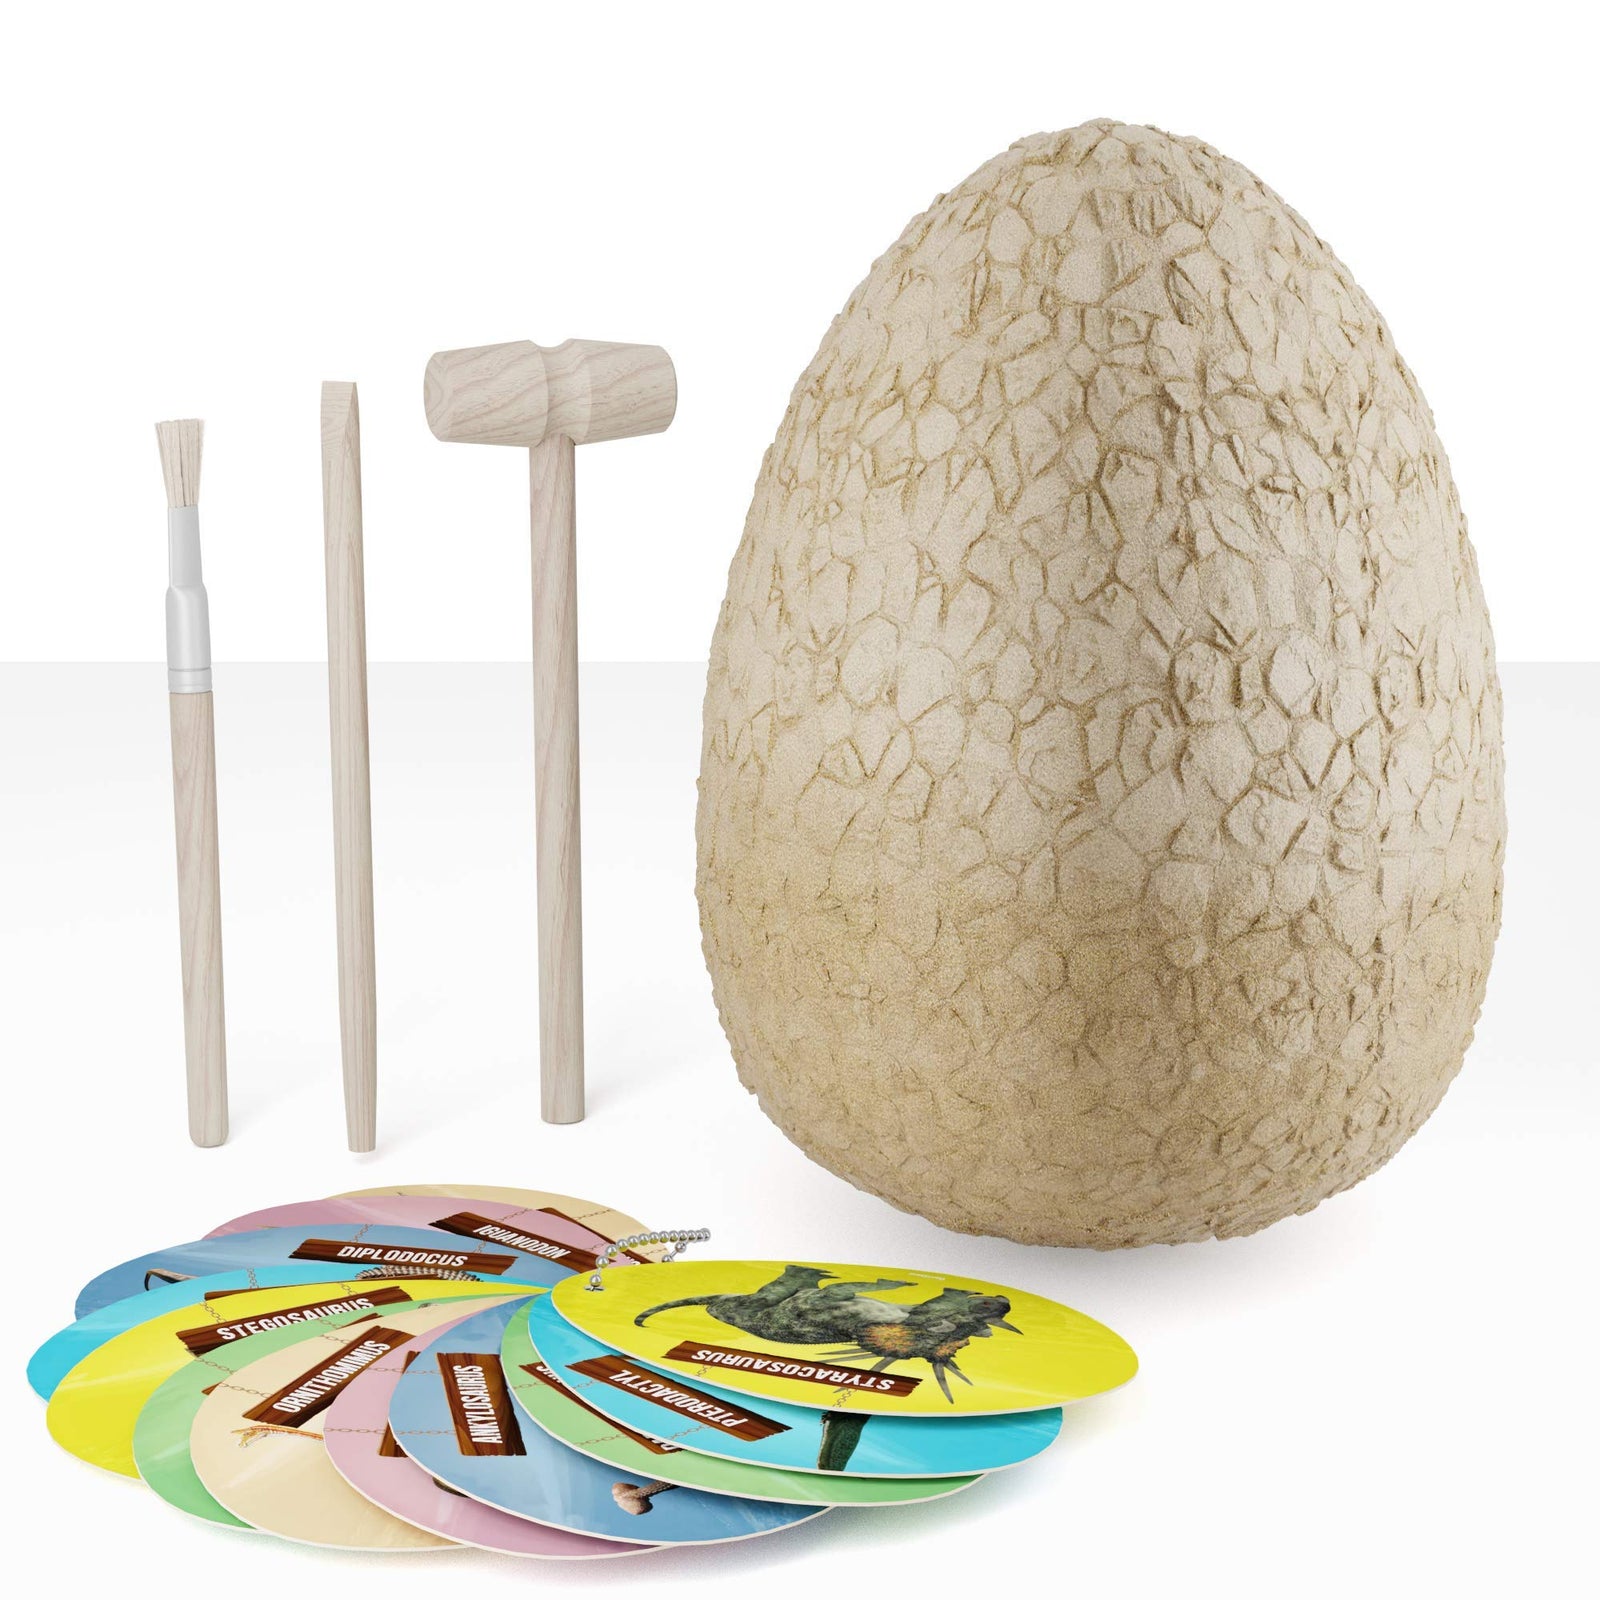 Jumbo Dino Egg - Unearth 12 Unique Large Surprise Dinosaurs in One Giant Filled Egg - Discover Dinosaur Archaeology Science STEM Crafts Gifts for Boys & Girls…